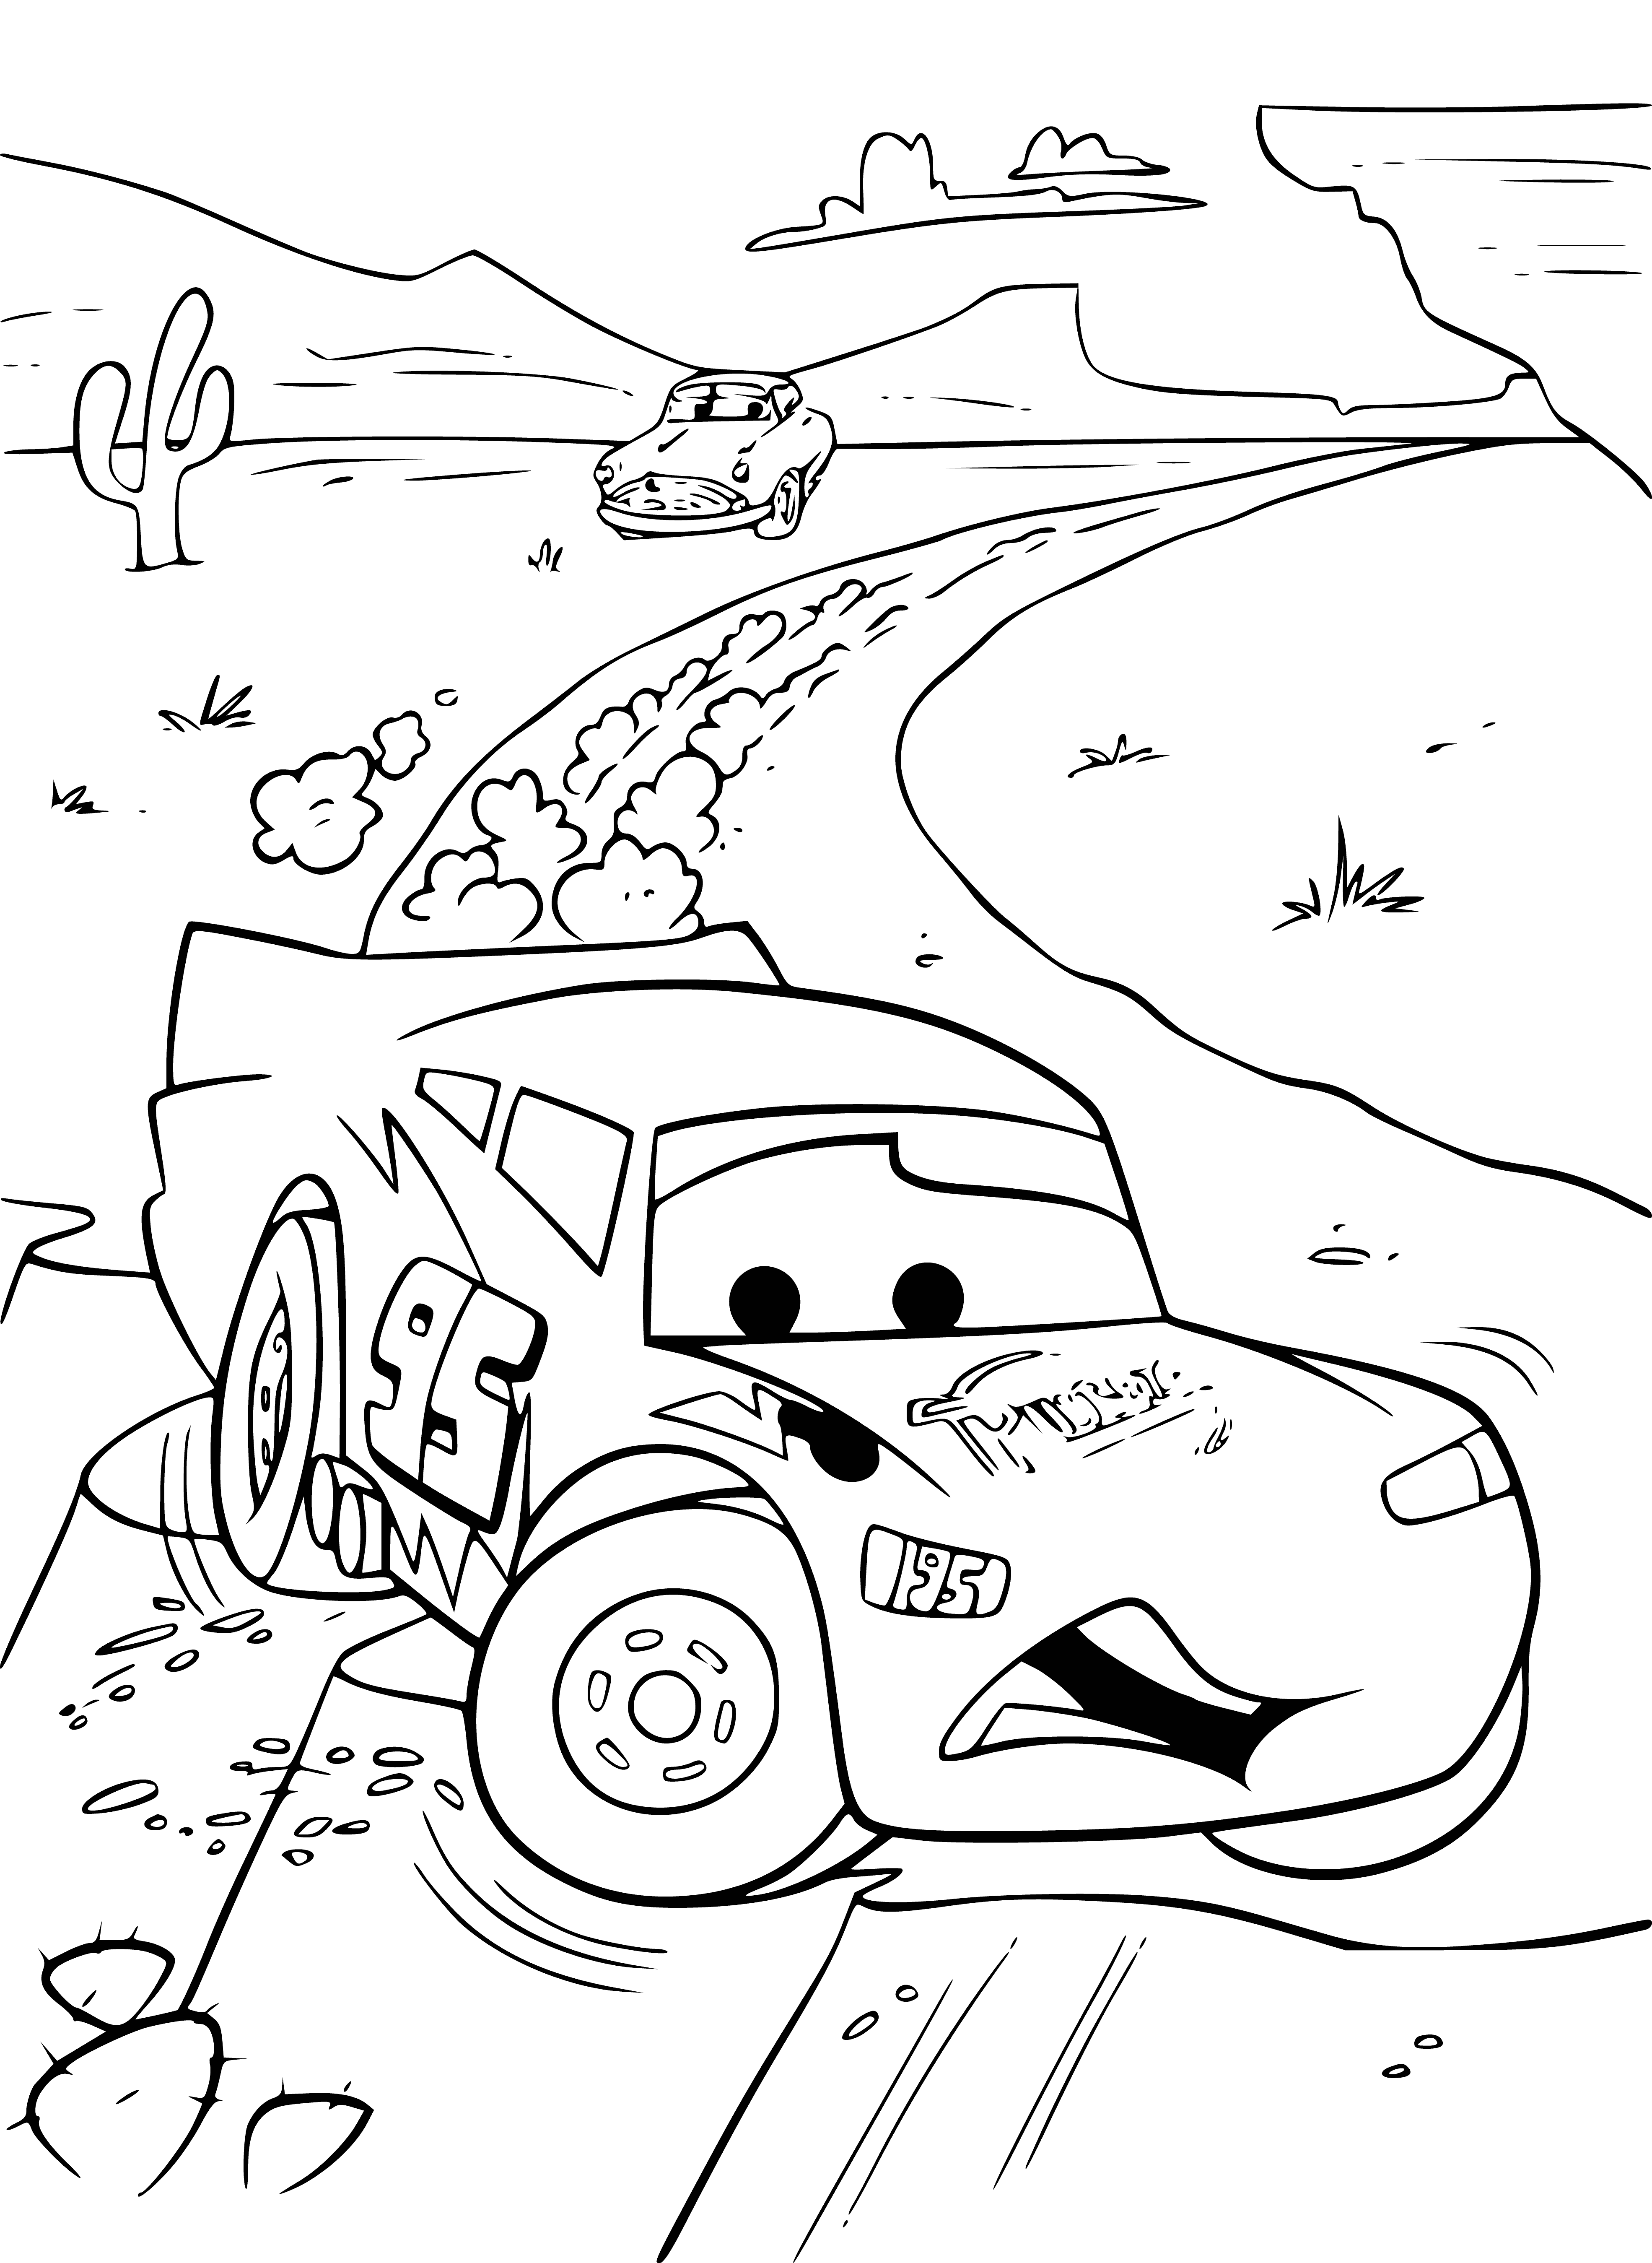 Before the fall coloring page